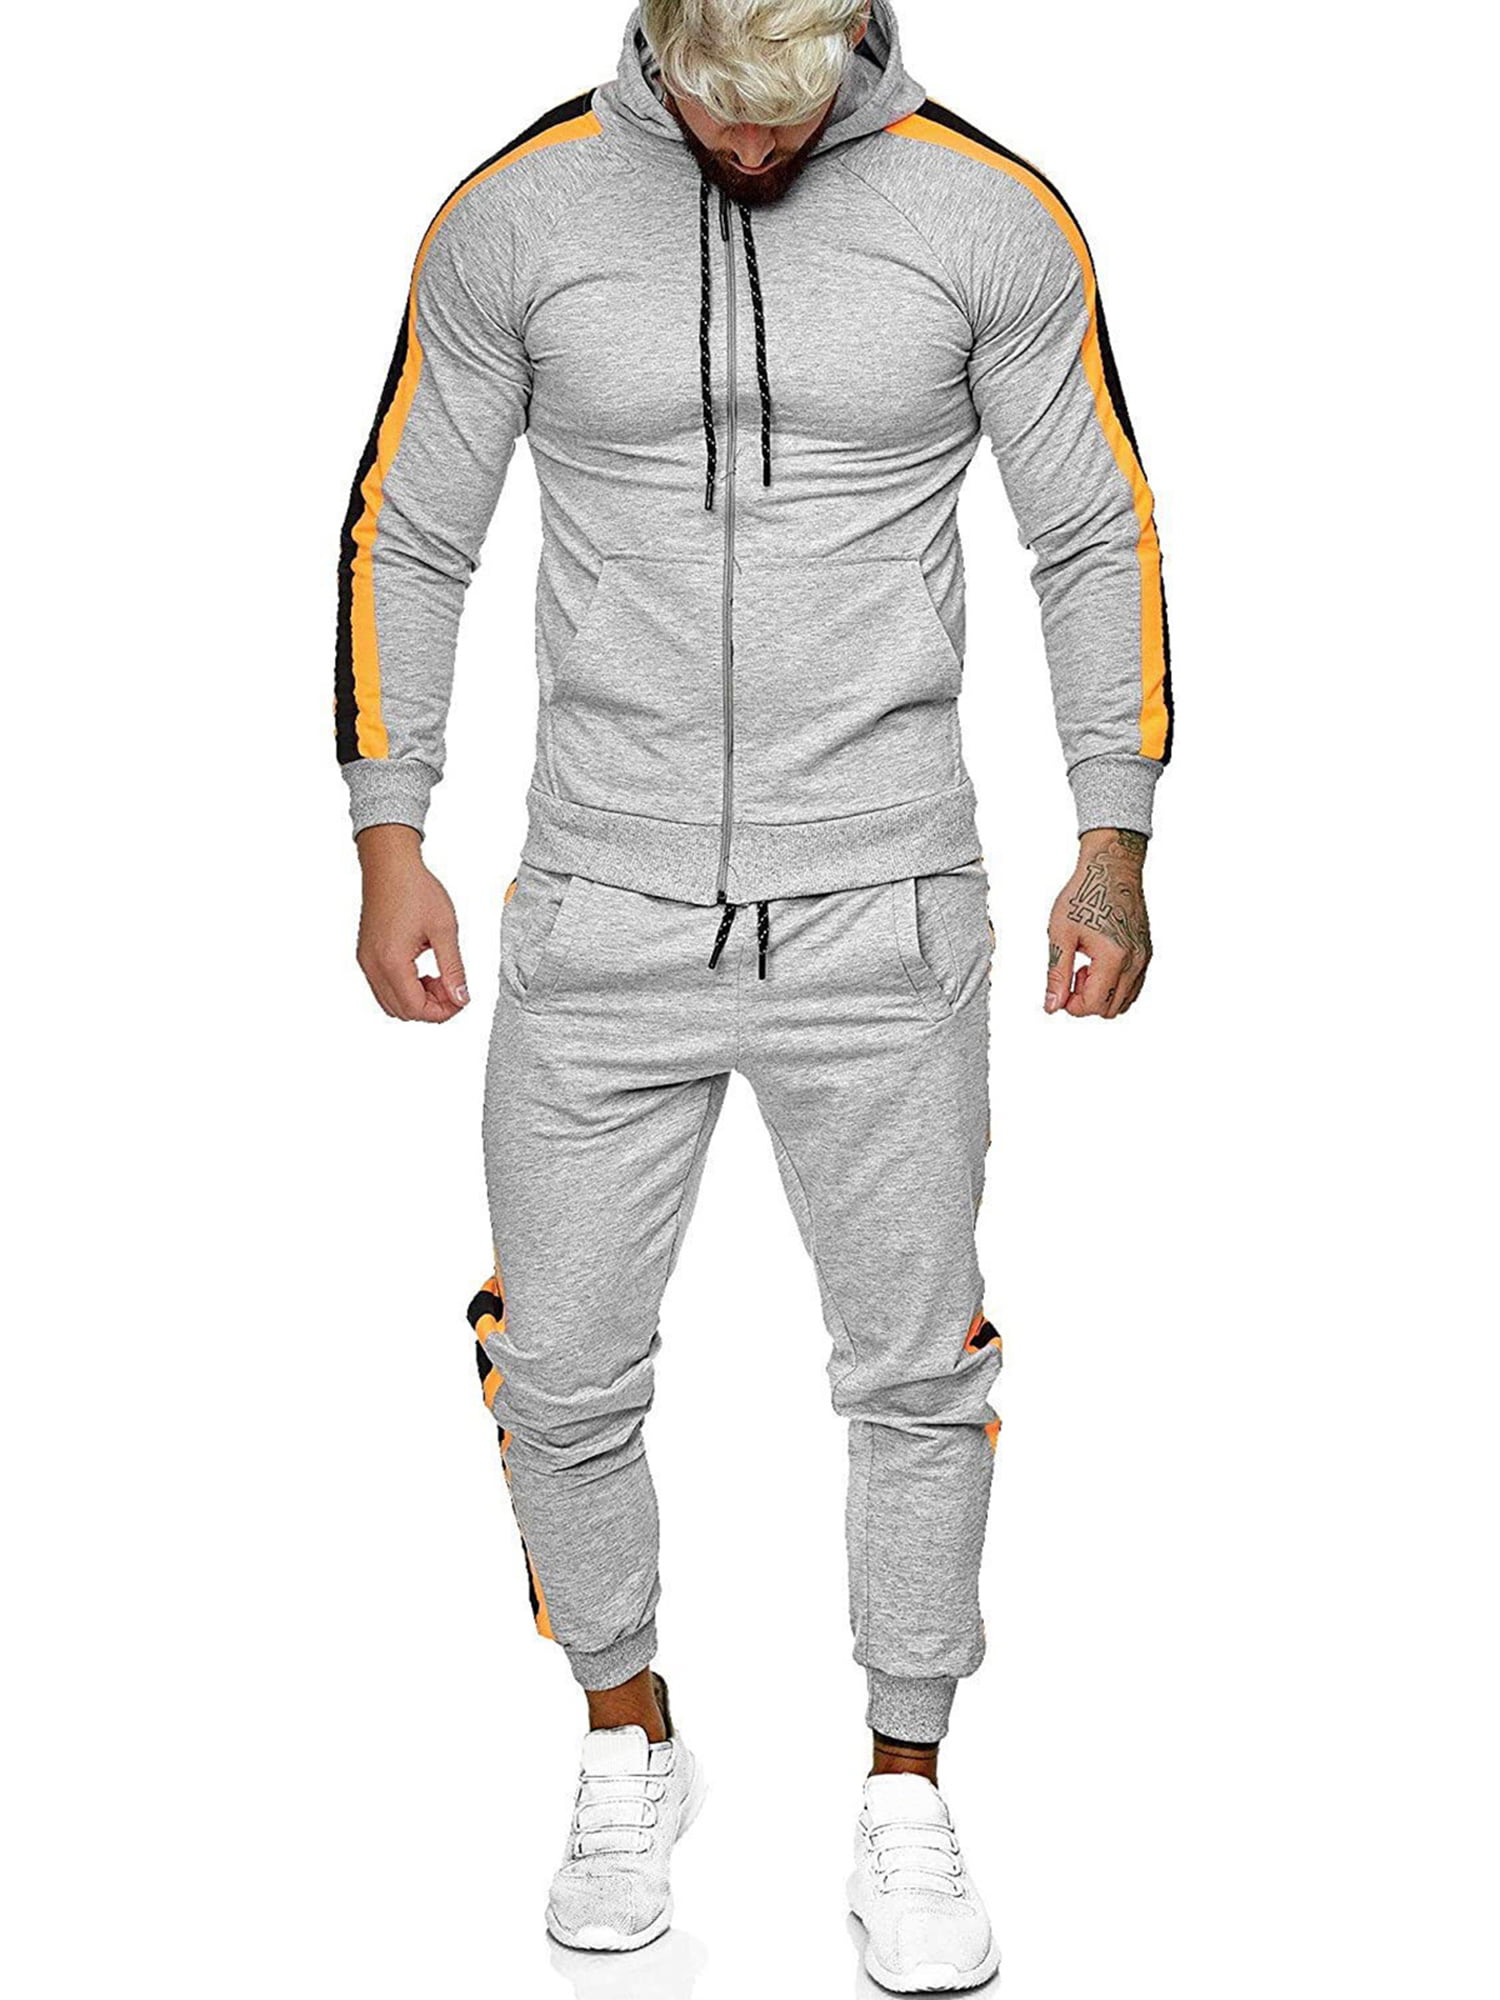 Mens Tracksuit 2 Pieces Sweat Suit Casual Hooded Jacket & Pants Thicken Warm Fleece Full Zip Joggers Sports Set with Pockets